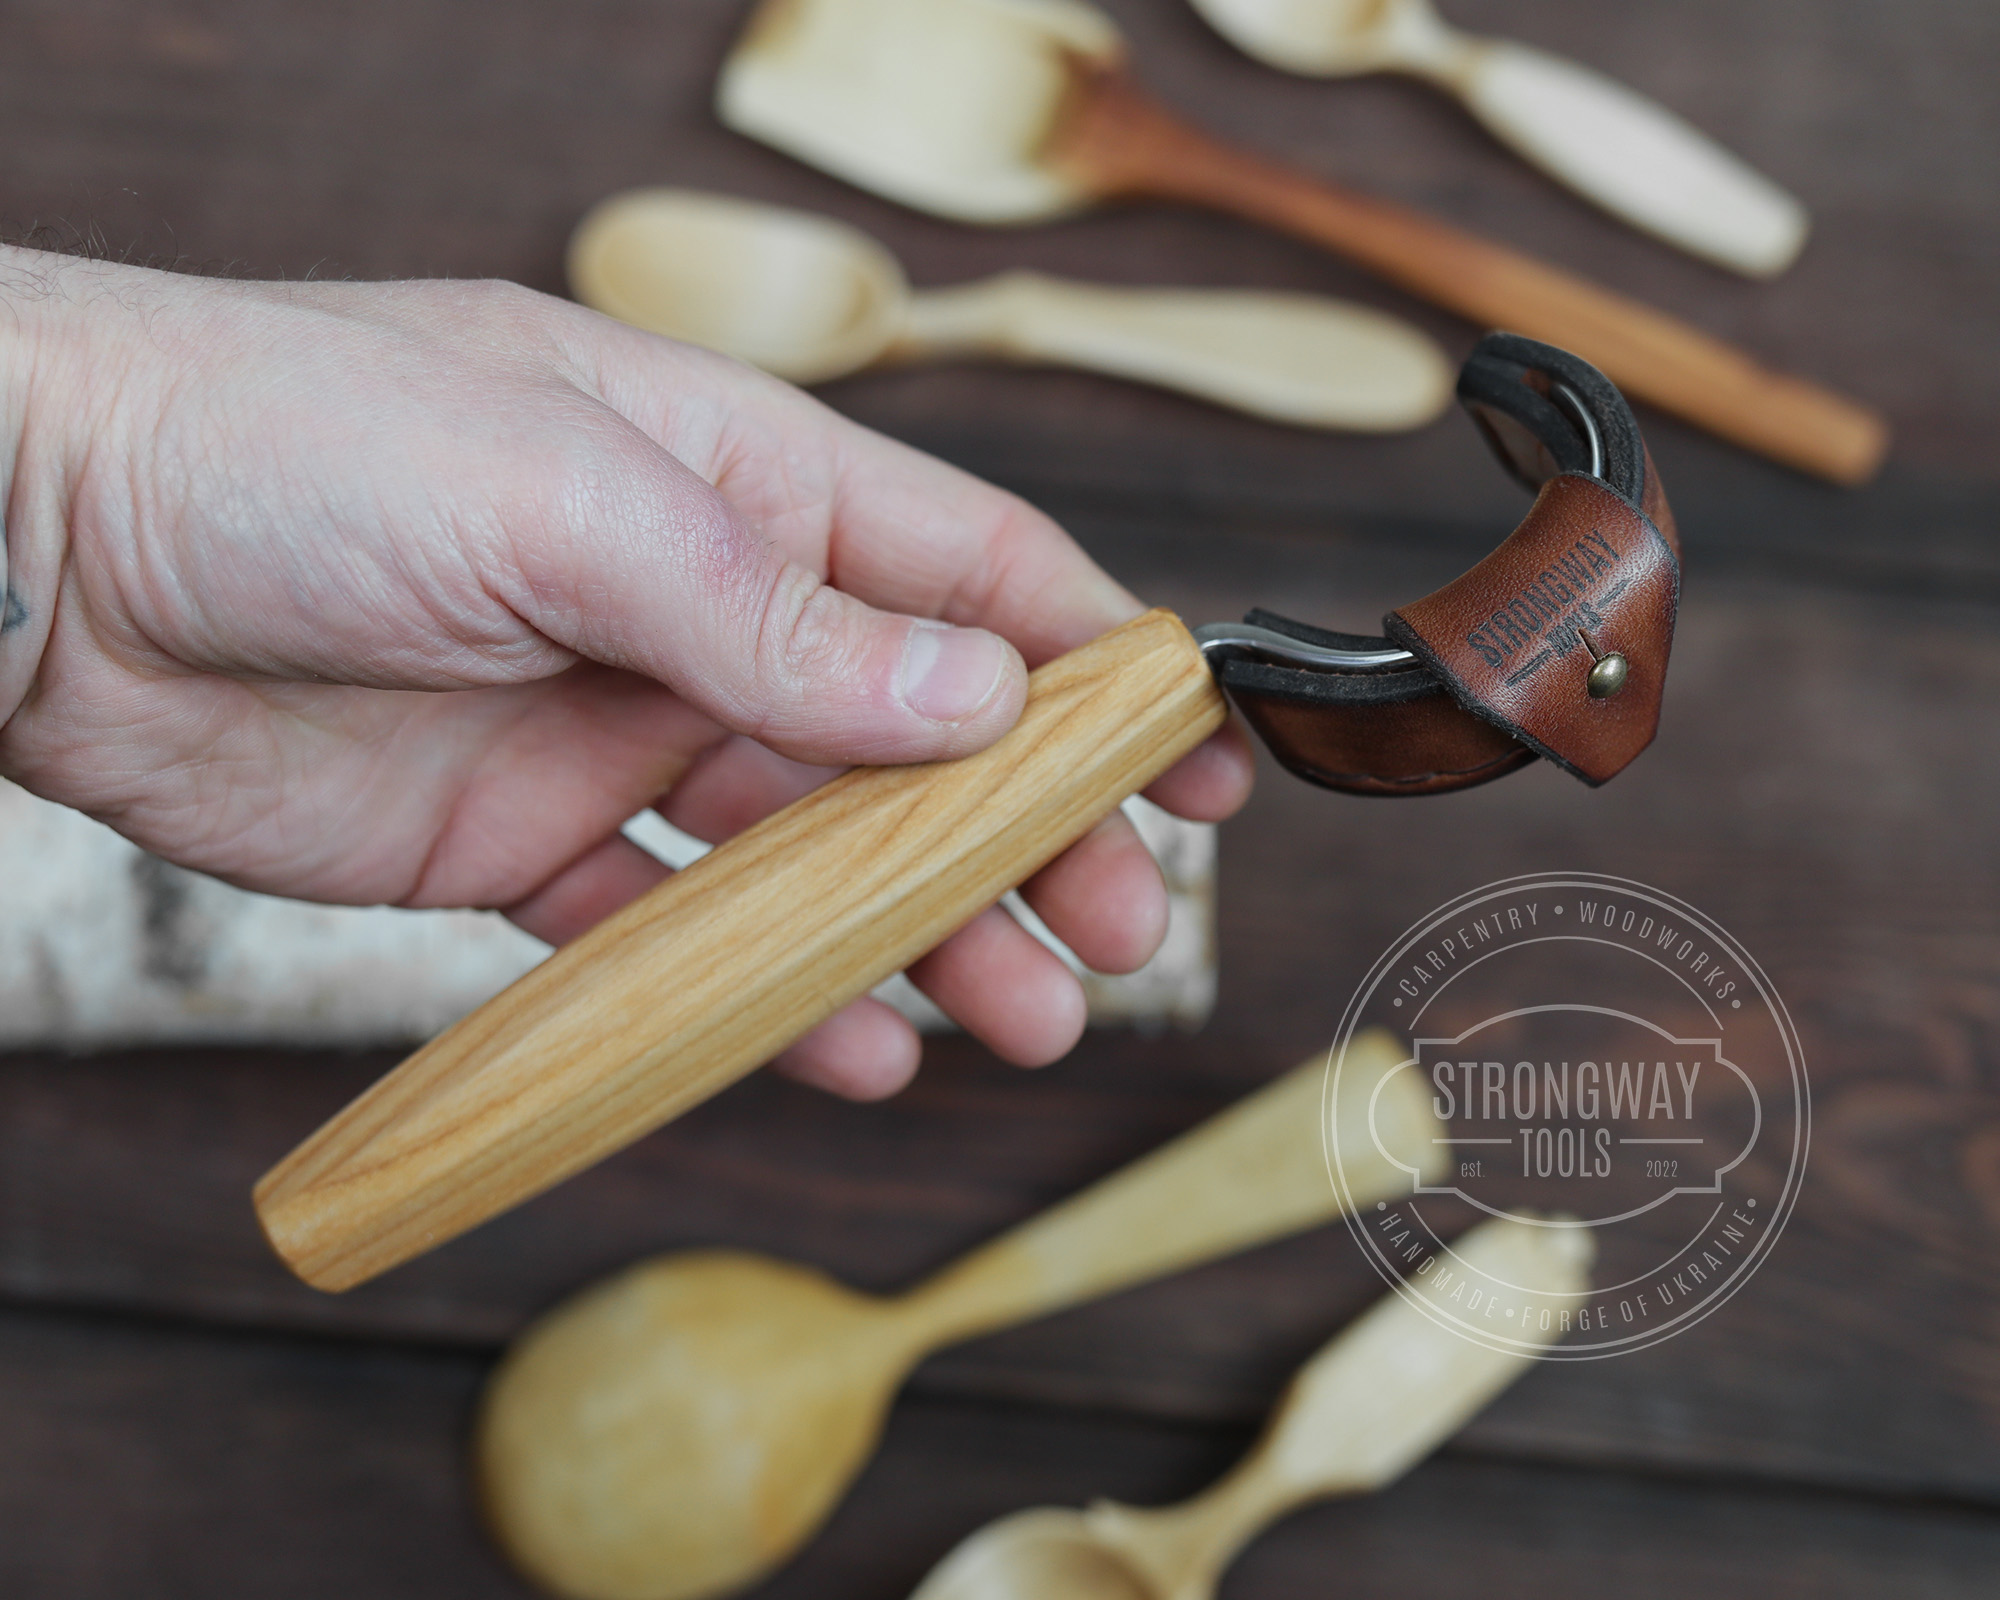 Spoon Carving Kit. Forged by Hand. Spoon Carving Tools. Scorp 